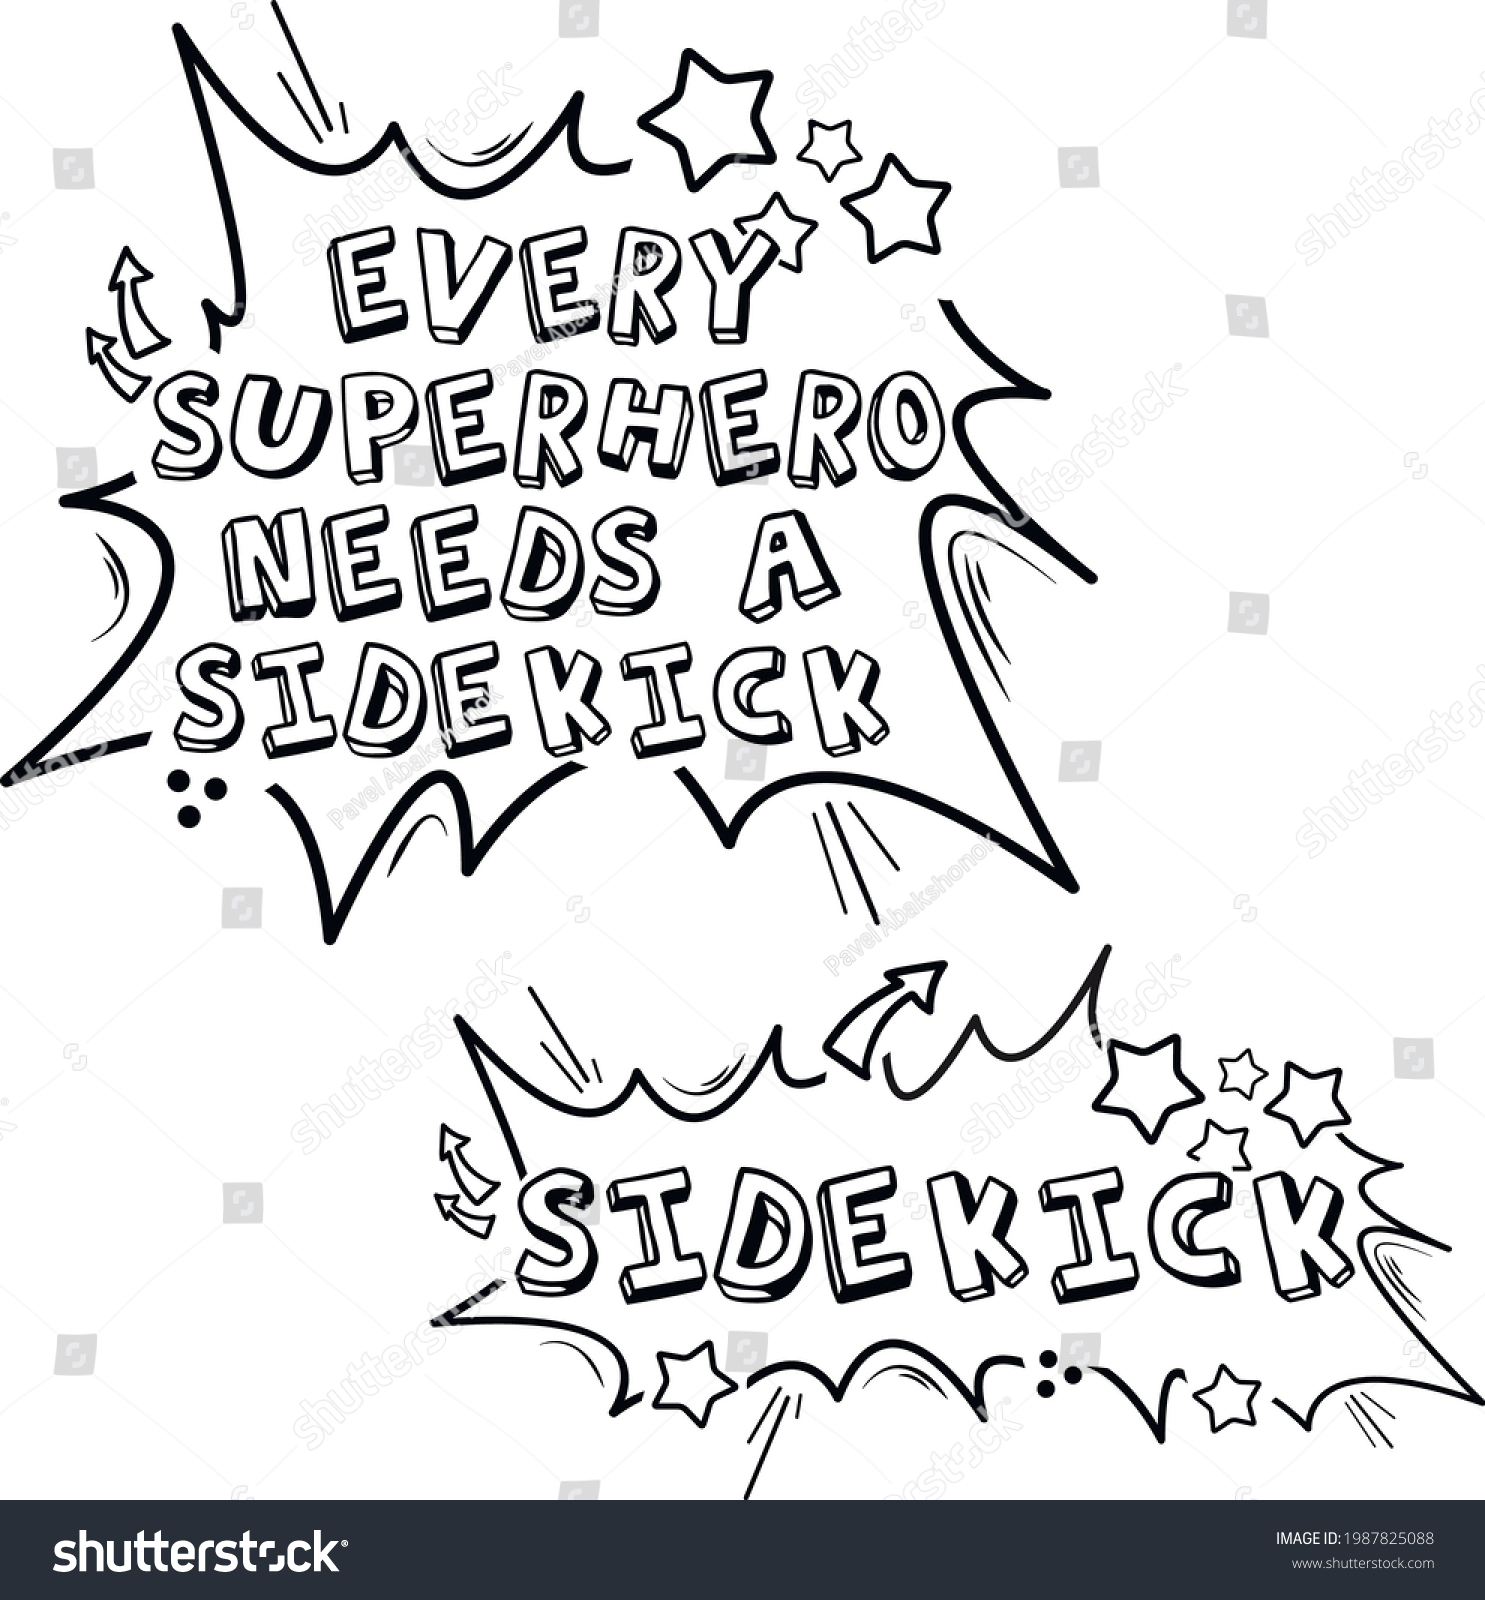 SVG of Every superhero needs a sidekick svg shirt design image isolated on white background. Sidekick svg vector illustration. Fathers Day svg DIY Dad and Me Shirt Superhero Svg Cut Files Daddy and Son Shirt svg